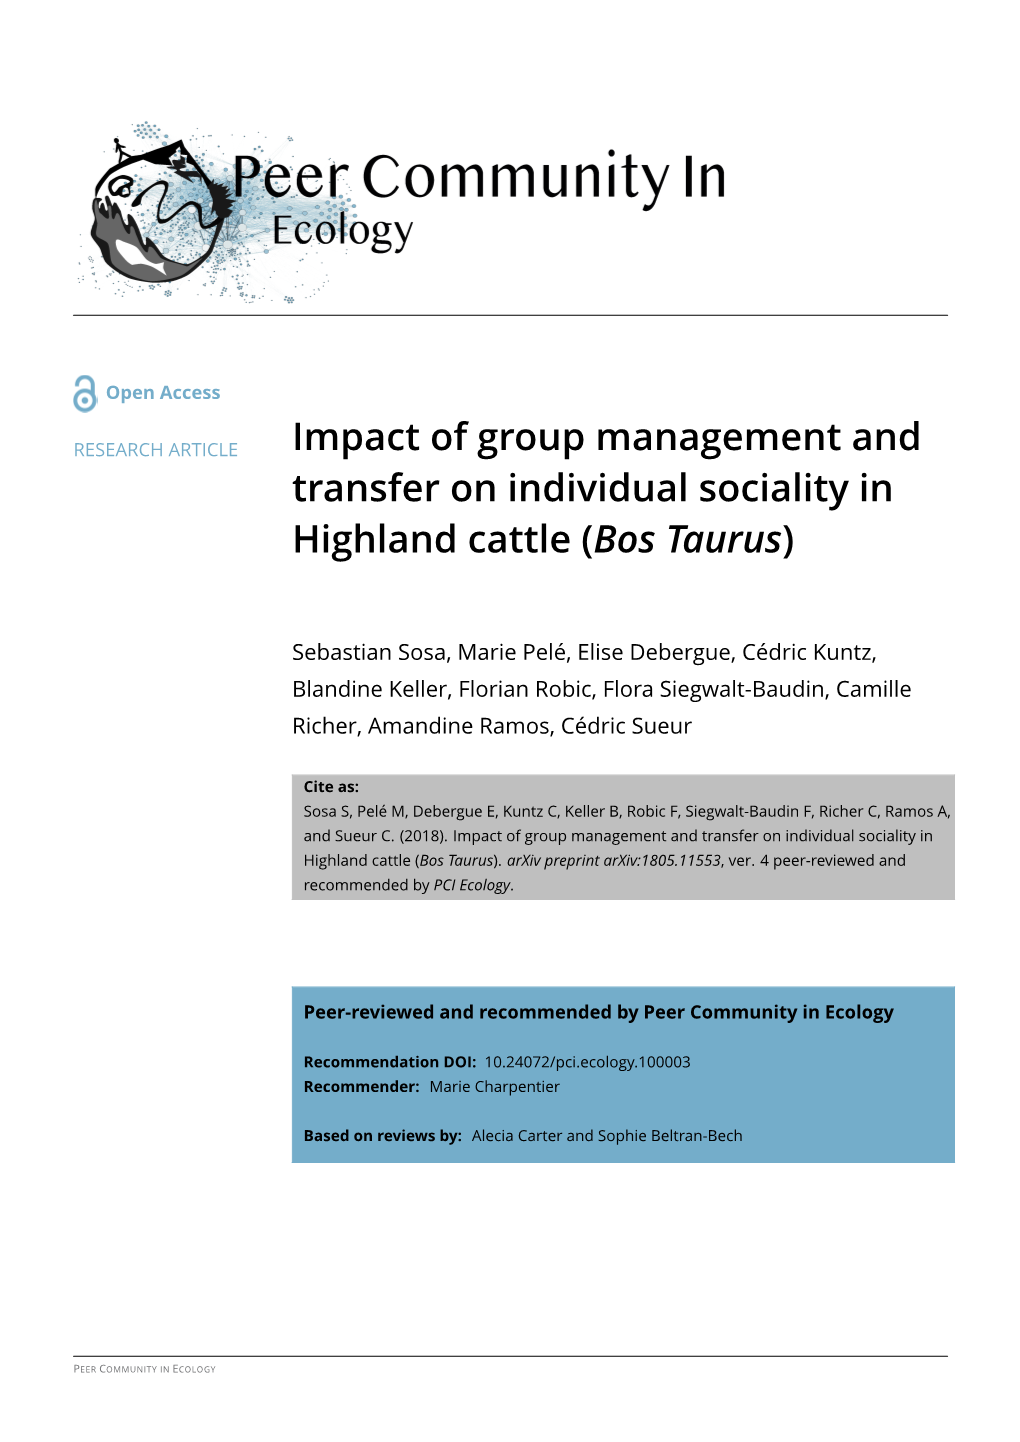 Impact of Group Management and Transfer on Individual Sociality in Highland Cattle (Bos Taurus)